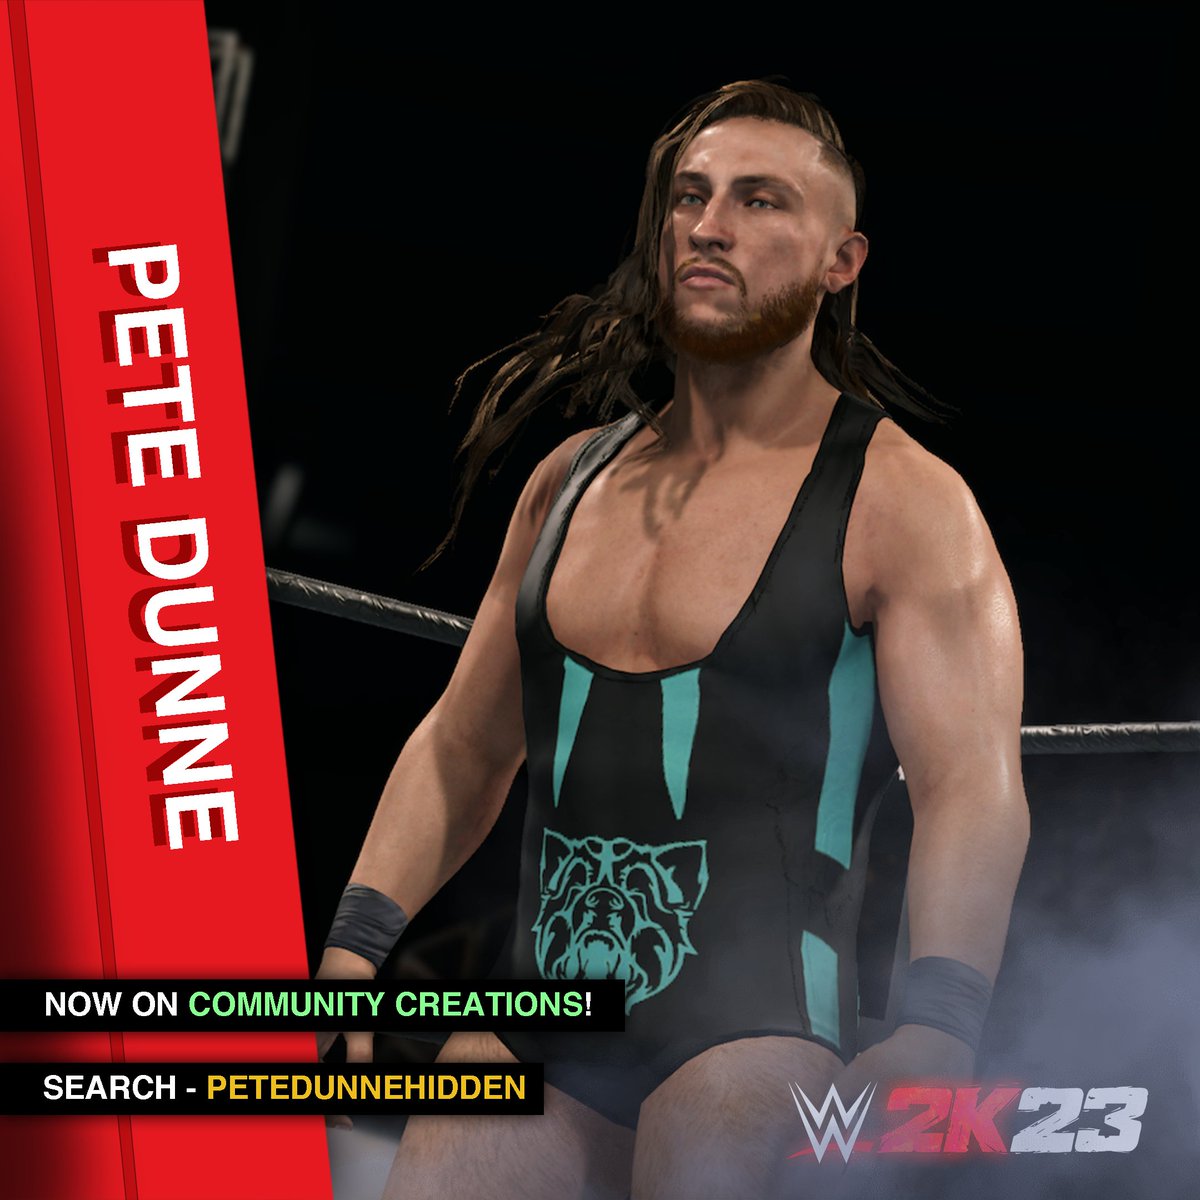 Pete Dunne ~ NXT TakeOver '19 ~ Hidden Model is available to download on #WWE2K23 Community Creations!

Search the hashtag ⇢ 𝙋𝙚𝙩𝙚𝘿𝙪𝙣𝙣𝙚𝙃𝙞𝙙𝙙𝙚𝙣

Includes the following:
👉 Hidden Pete Dunne commentary
👉 Hidden Pete Dunne crowd chants
👉 Hidden NXT TakeOver attire…